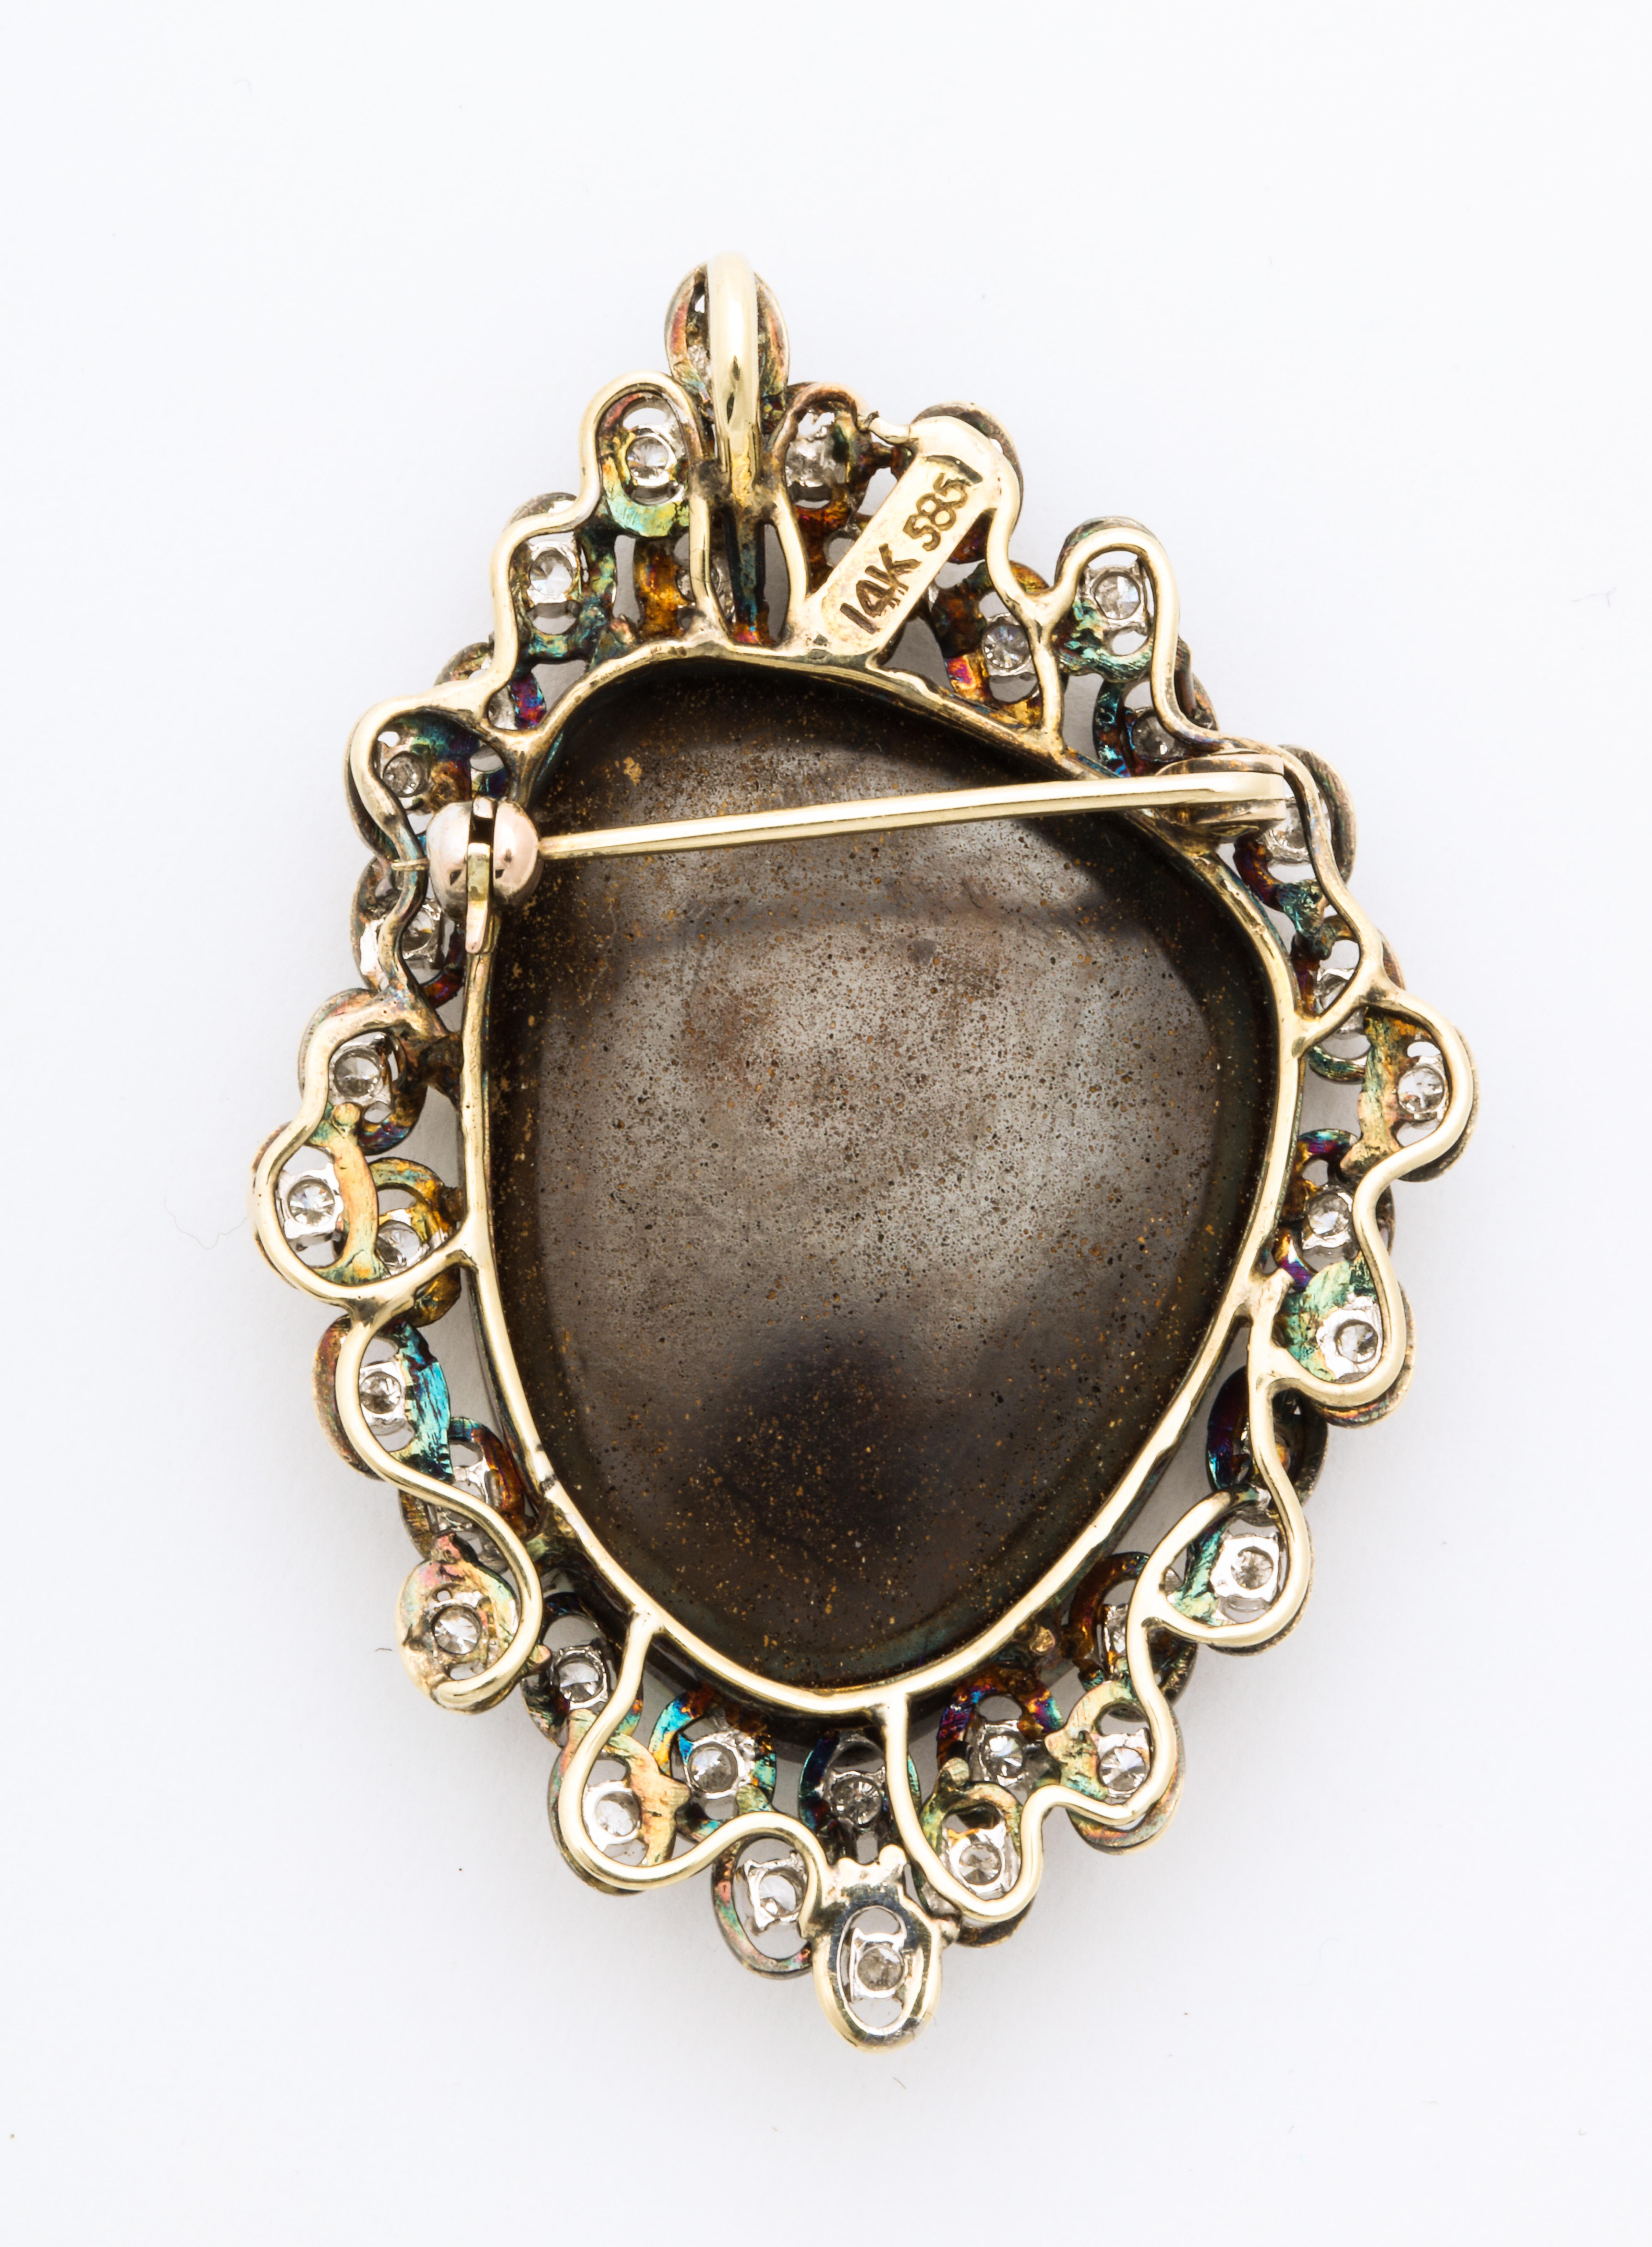 A fabulous large opal brooch/pendant surrounded by diamonds set in gold. This wonderful boulder opal that is set in 14k gold and surrounded by clustered diamonds in an asymmetrical configuration. It can be worn either as a brooch or as a pendant.